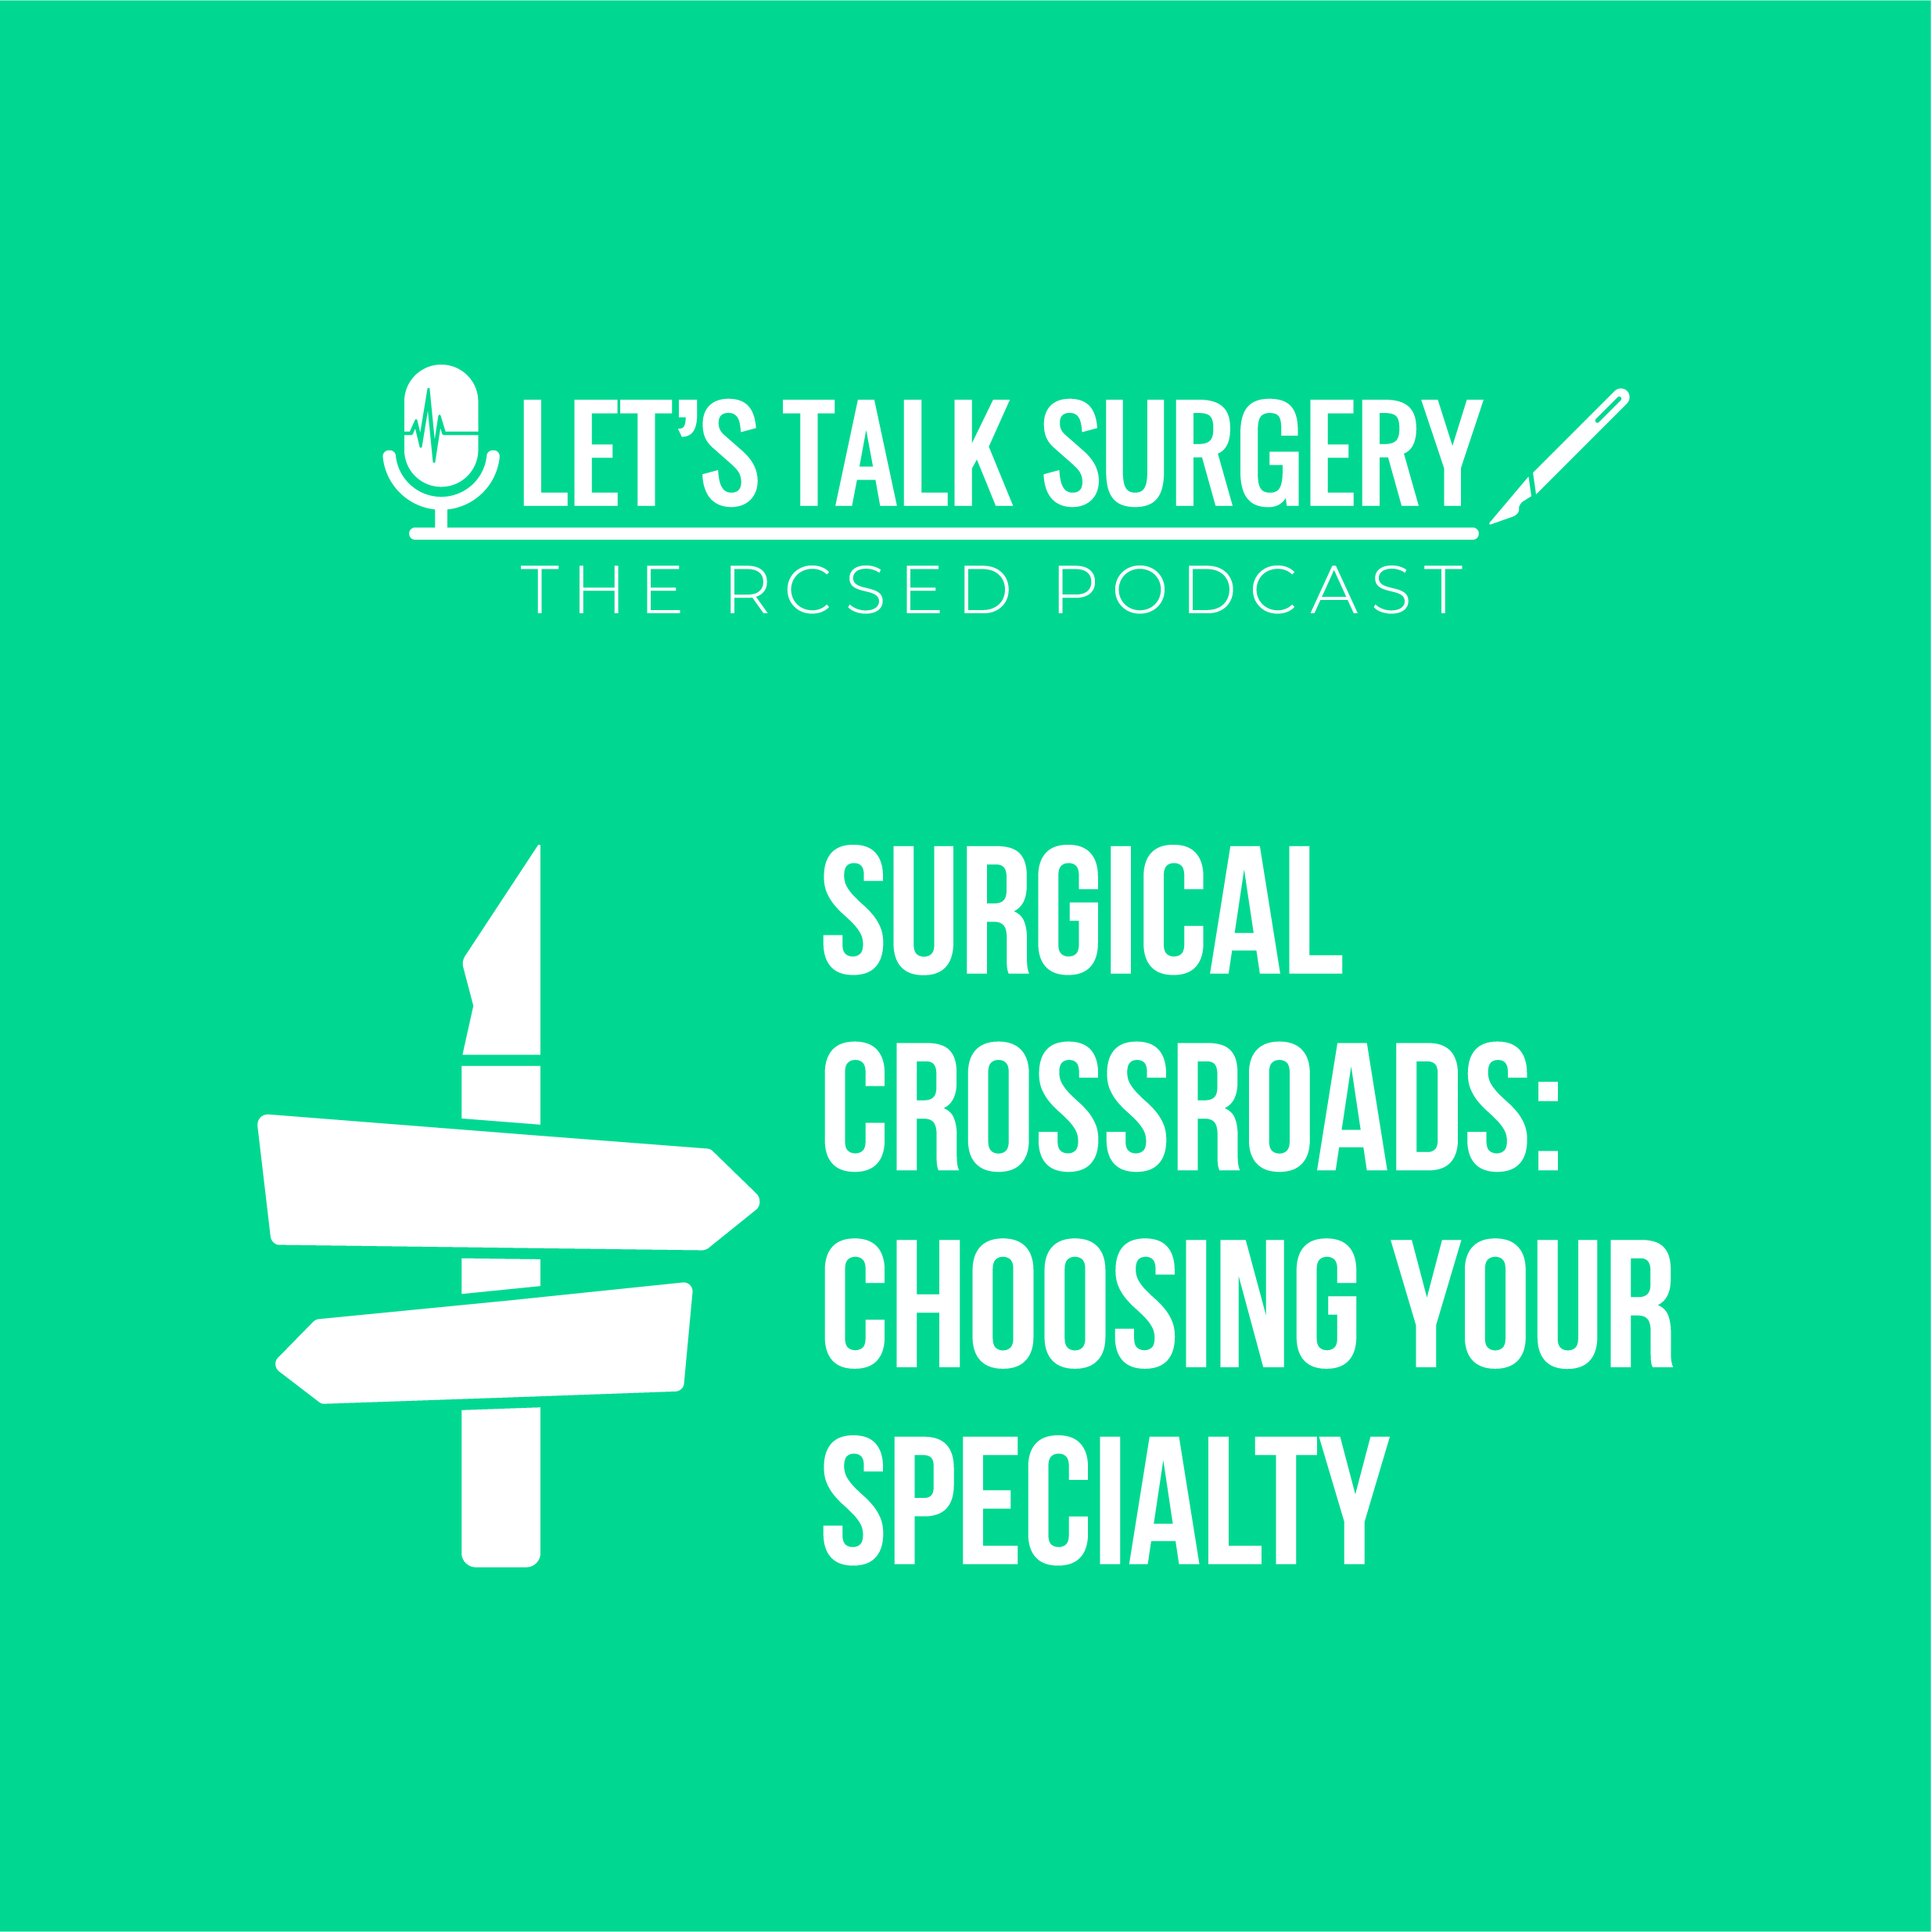 Let's Talk Surgery Podcast, Surgical Crossroads: "Choosing your specialty - the Orthopaedics episode"